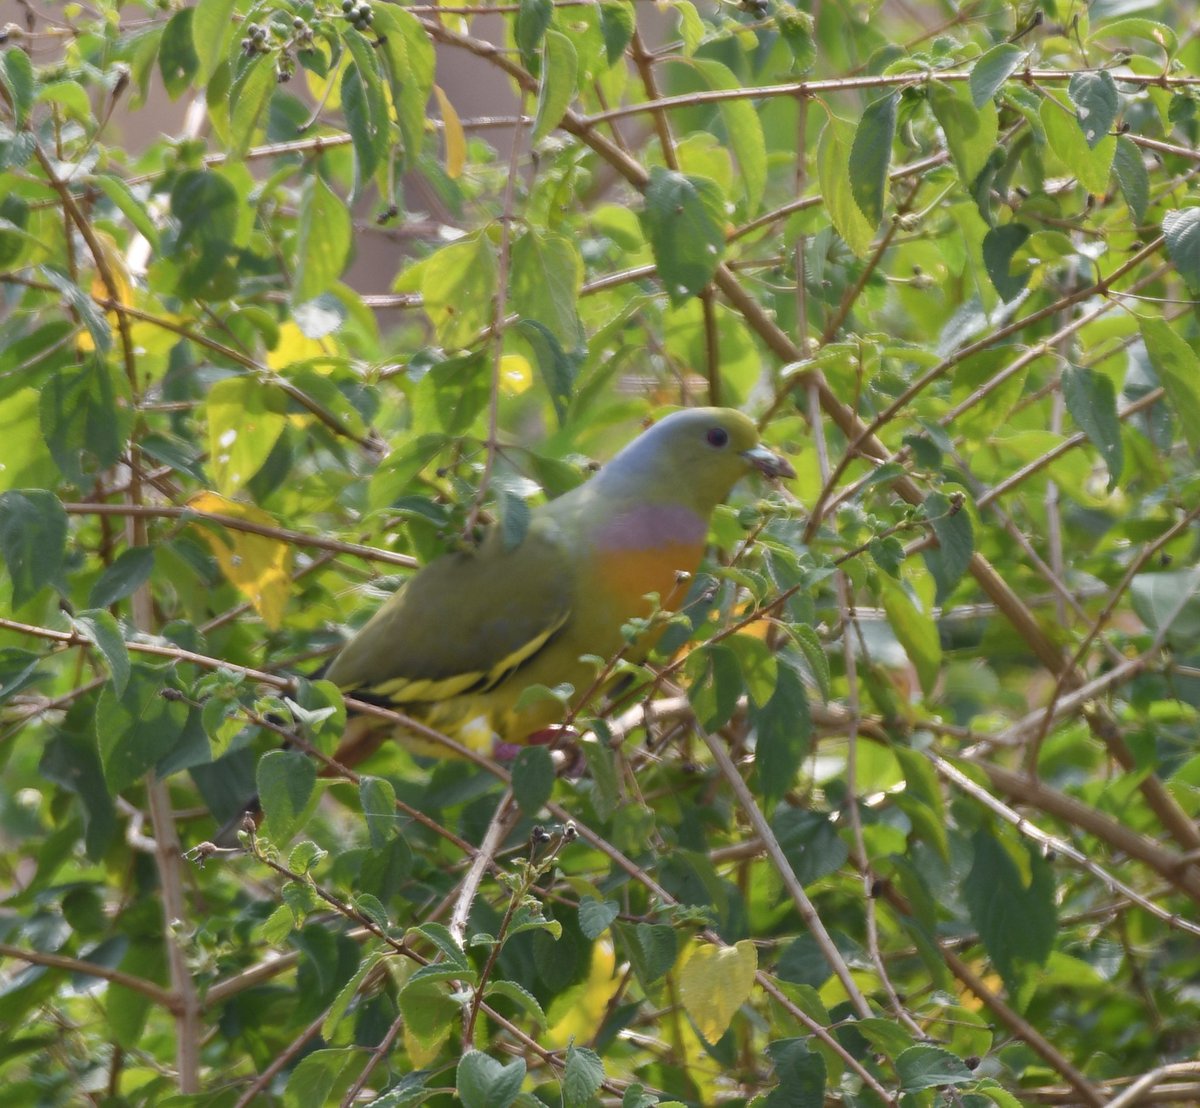 New find in ATR. First record with photographic evidence of Orange breasted Green pigeon in Amrabad Tiger Reserve.@ntca_india @TelanganaCMO @dobriyalrm @pargaien @rohithgopidi @